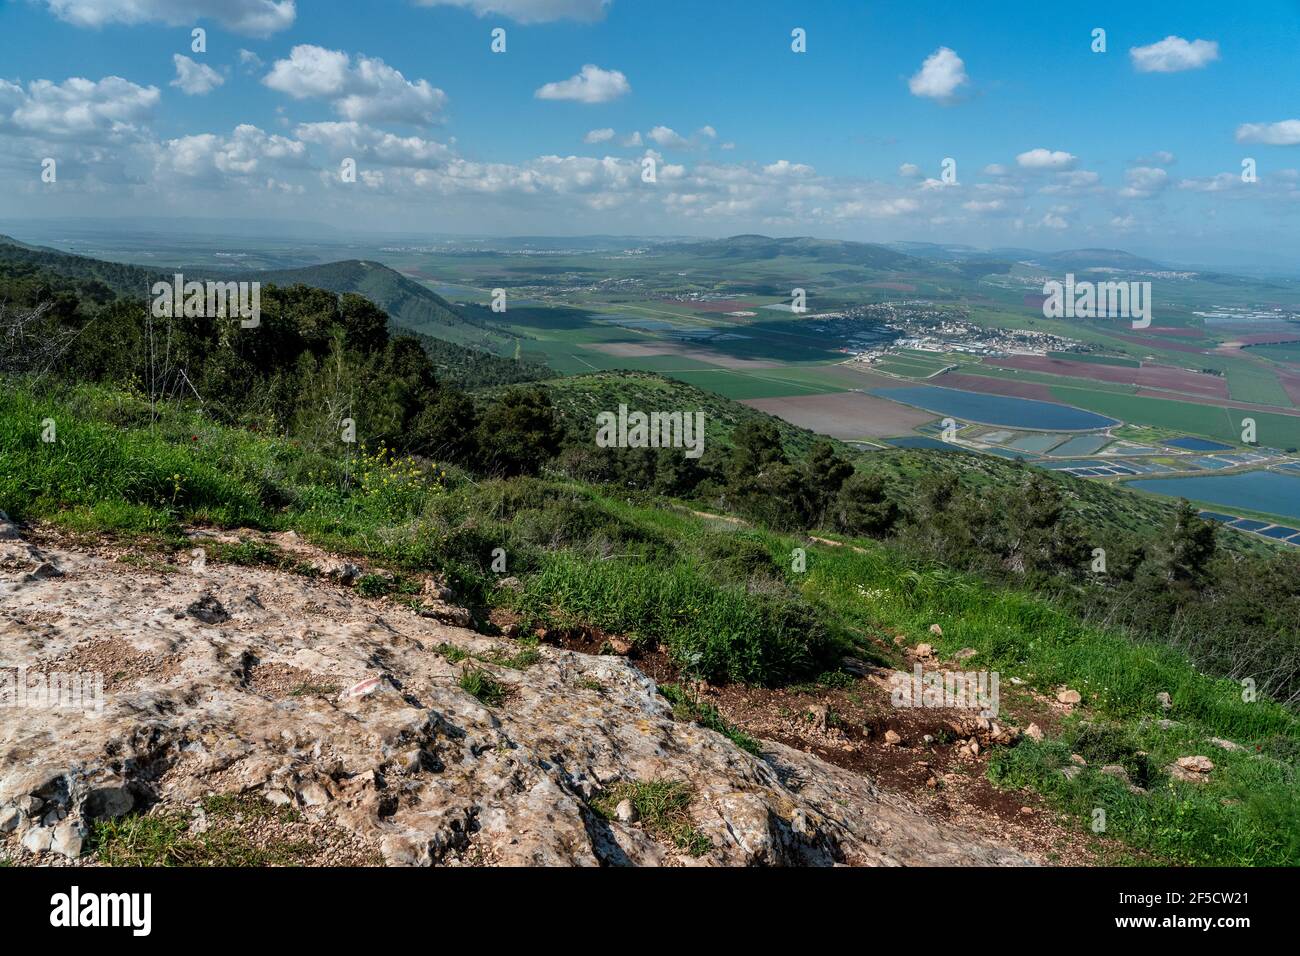 View of the Jezreel valley from Mount Gilboa observation point, Israel Stock Photo